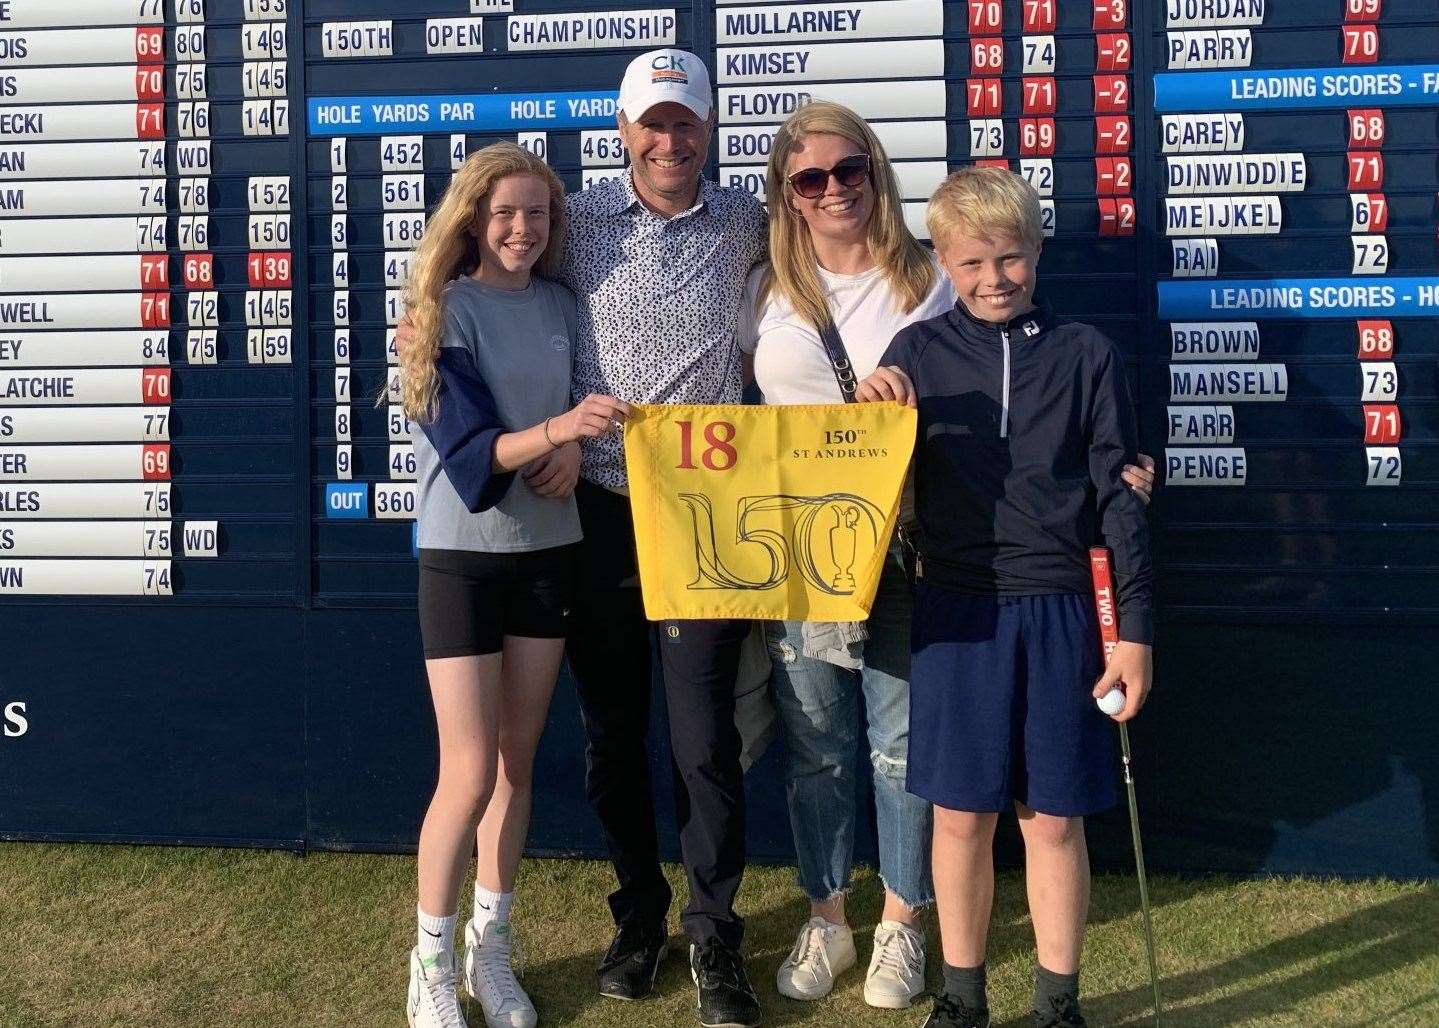 Matt Ford celebrates qualifying for The Open Championship with wife Suzie and children Teagan and Oscar.